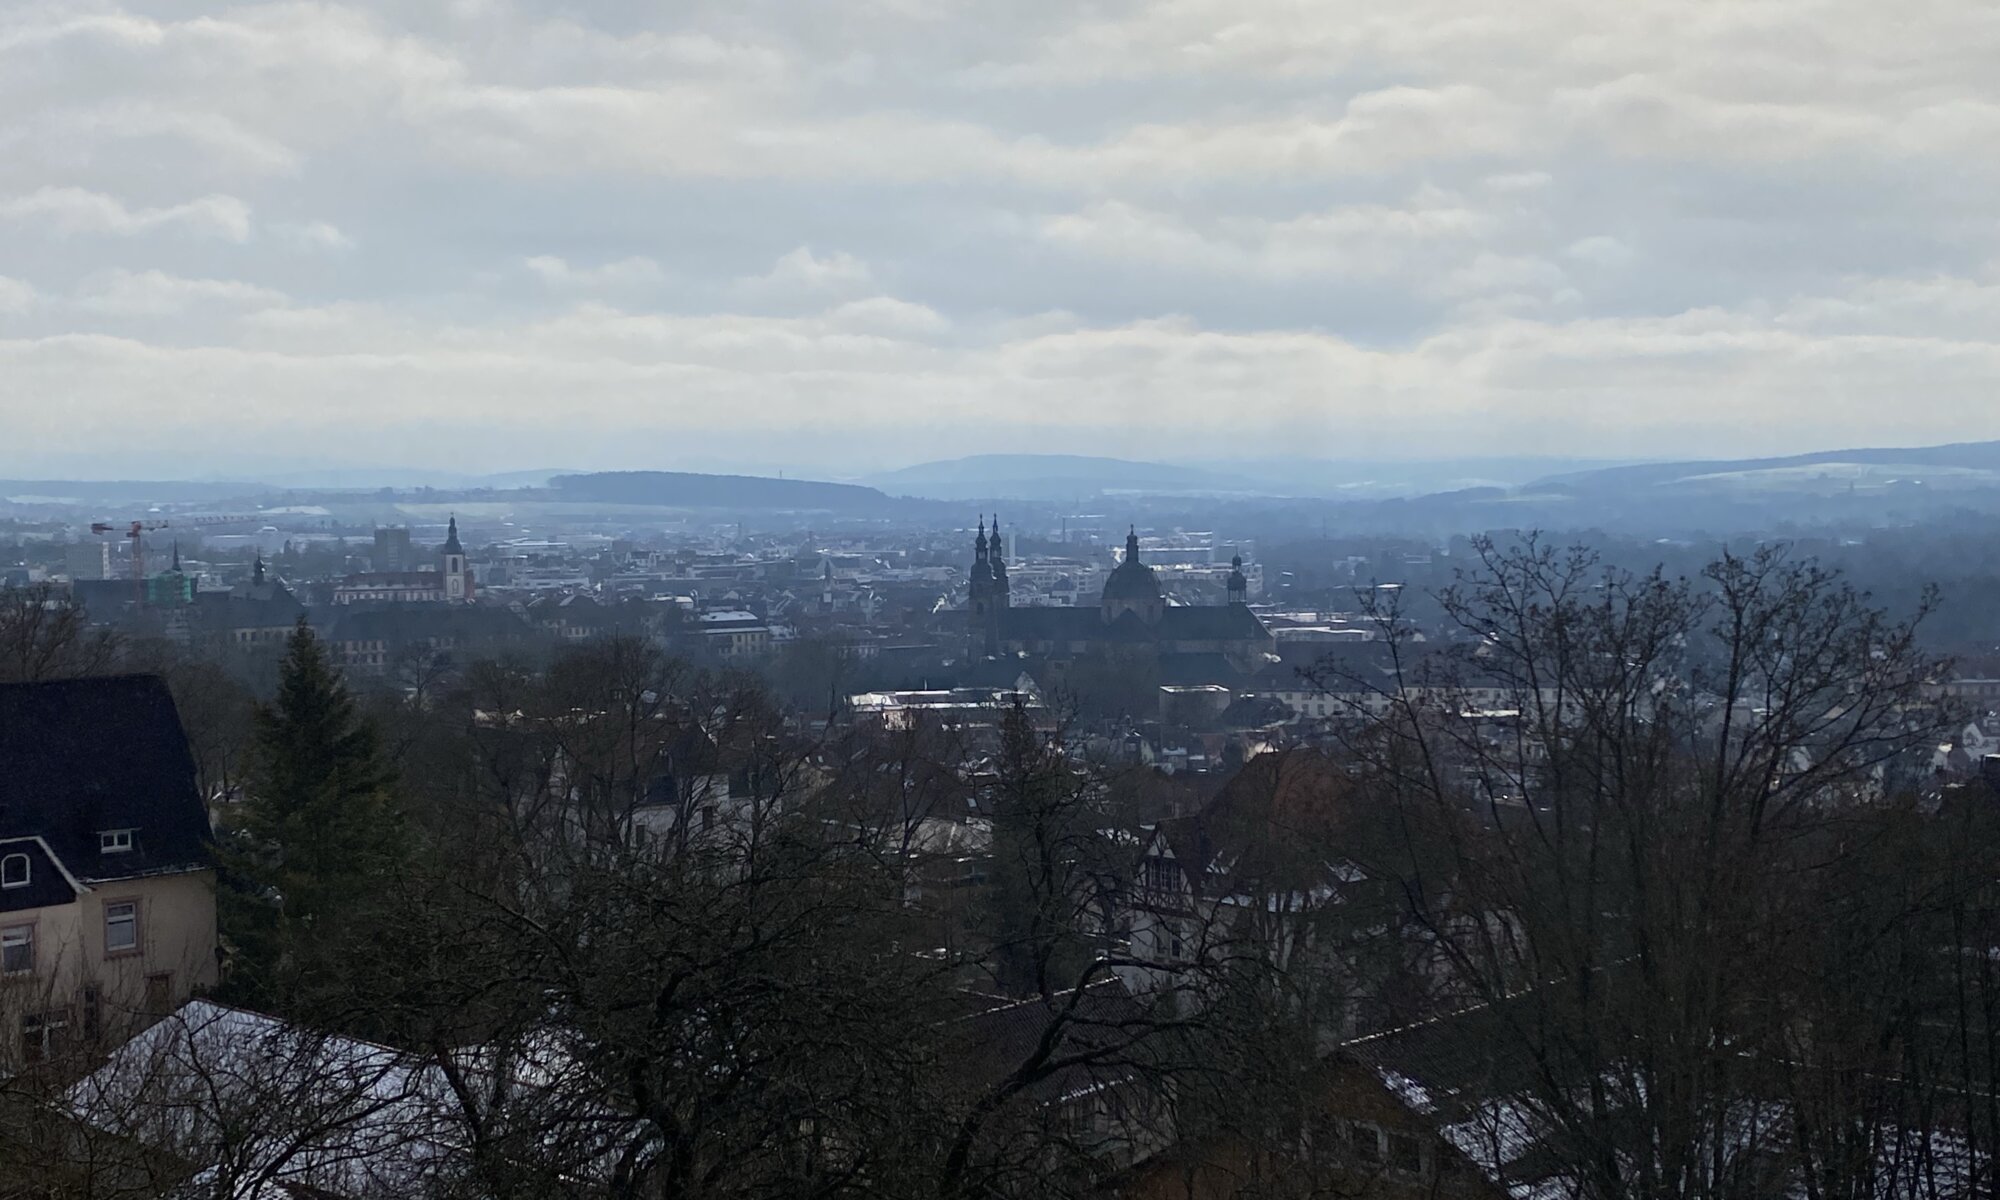 View from Kloster Frauenberg, Fulda